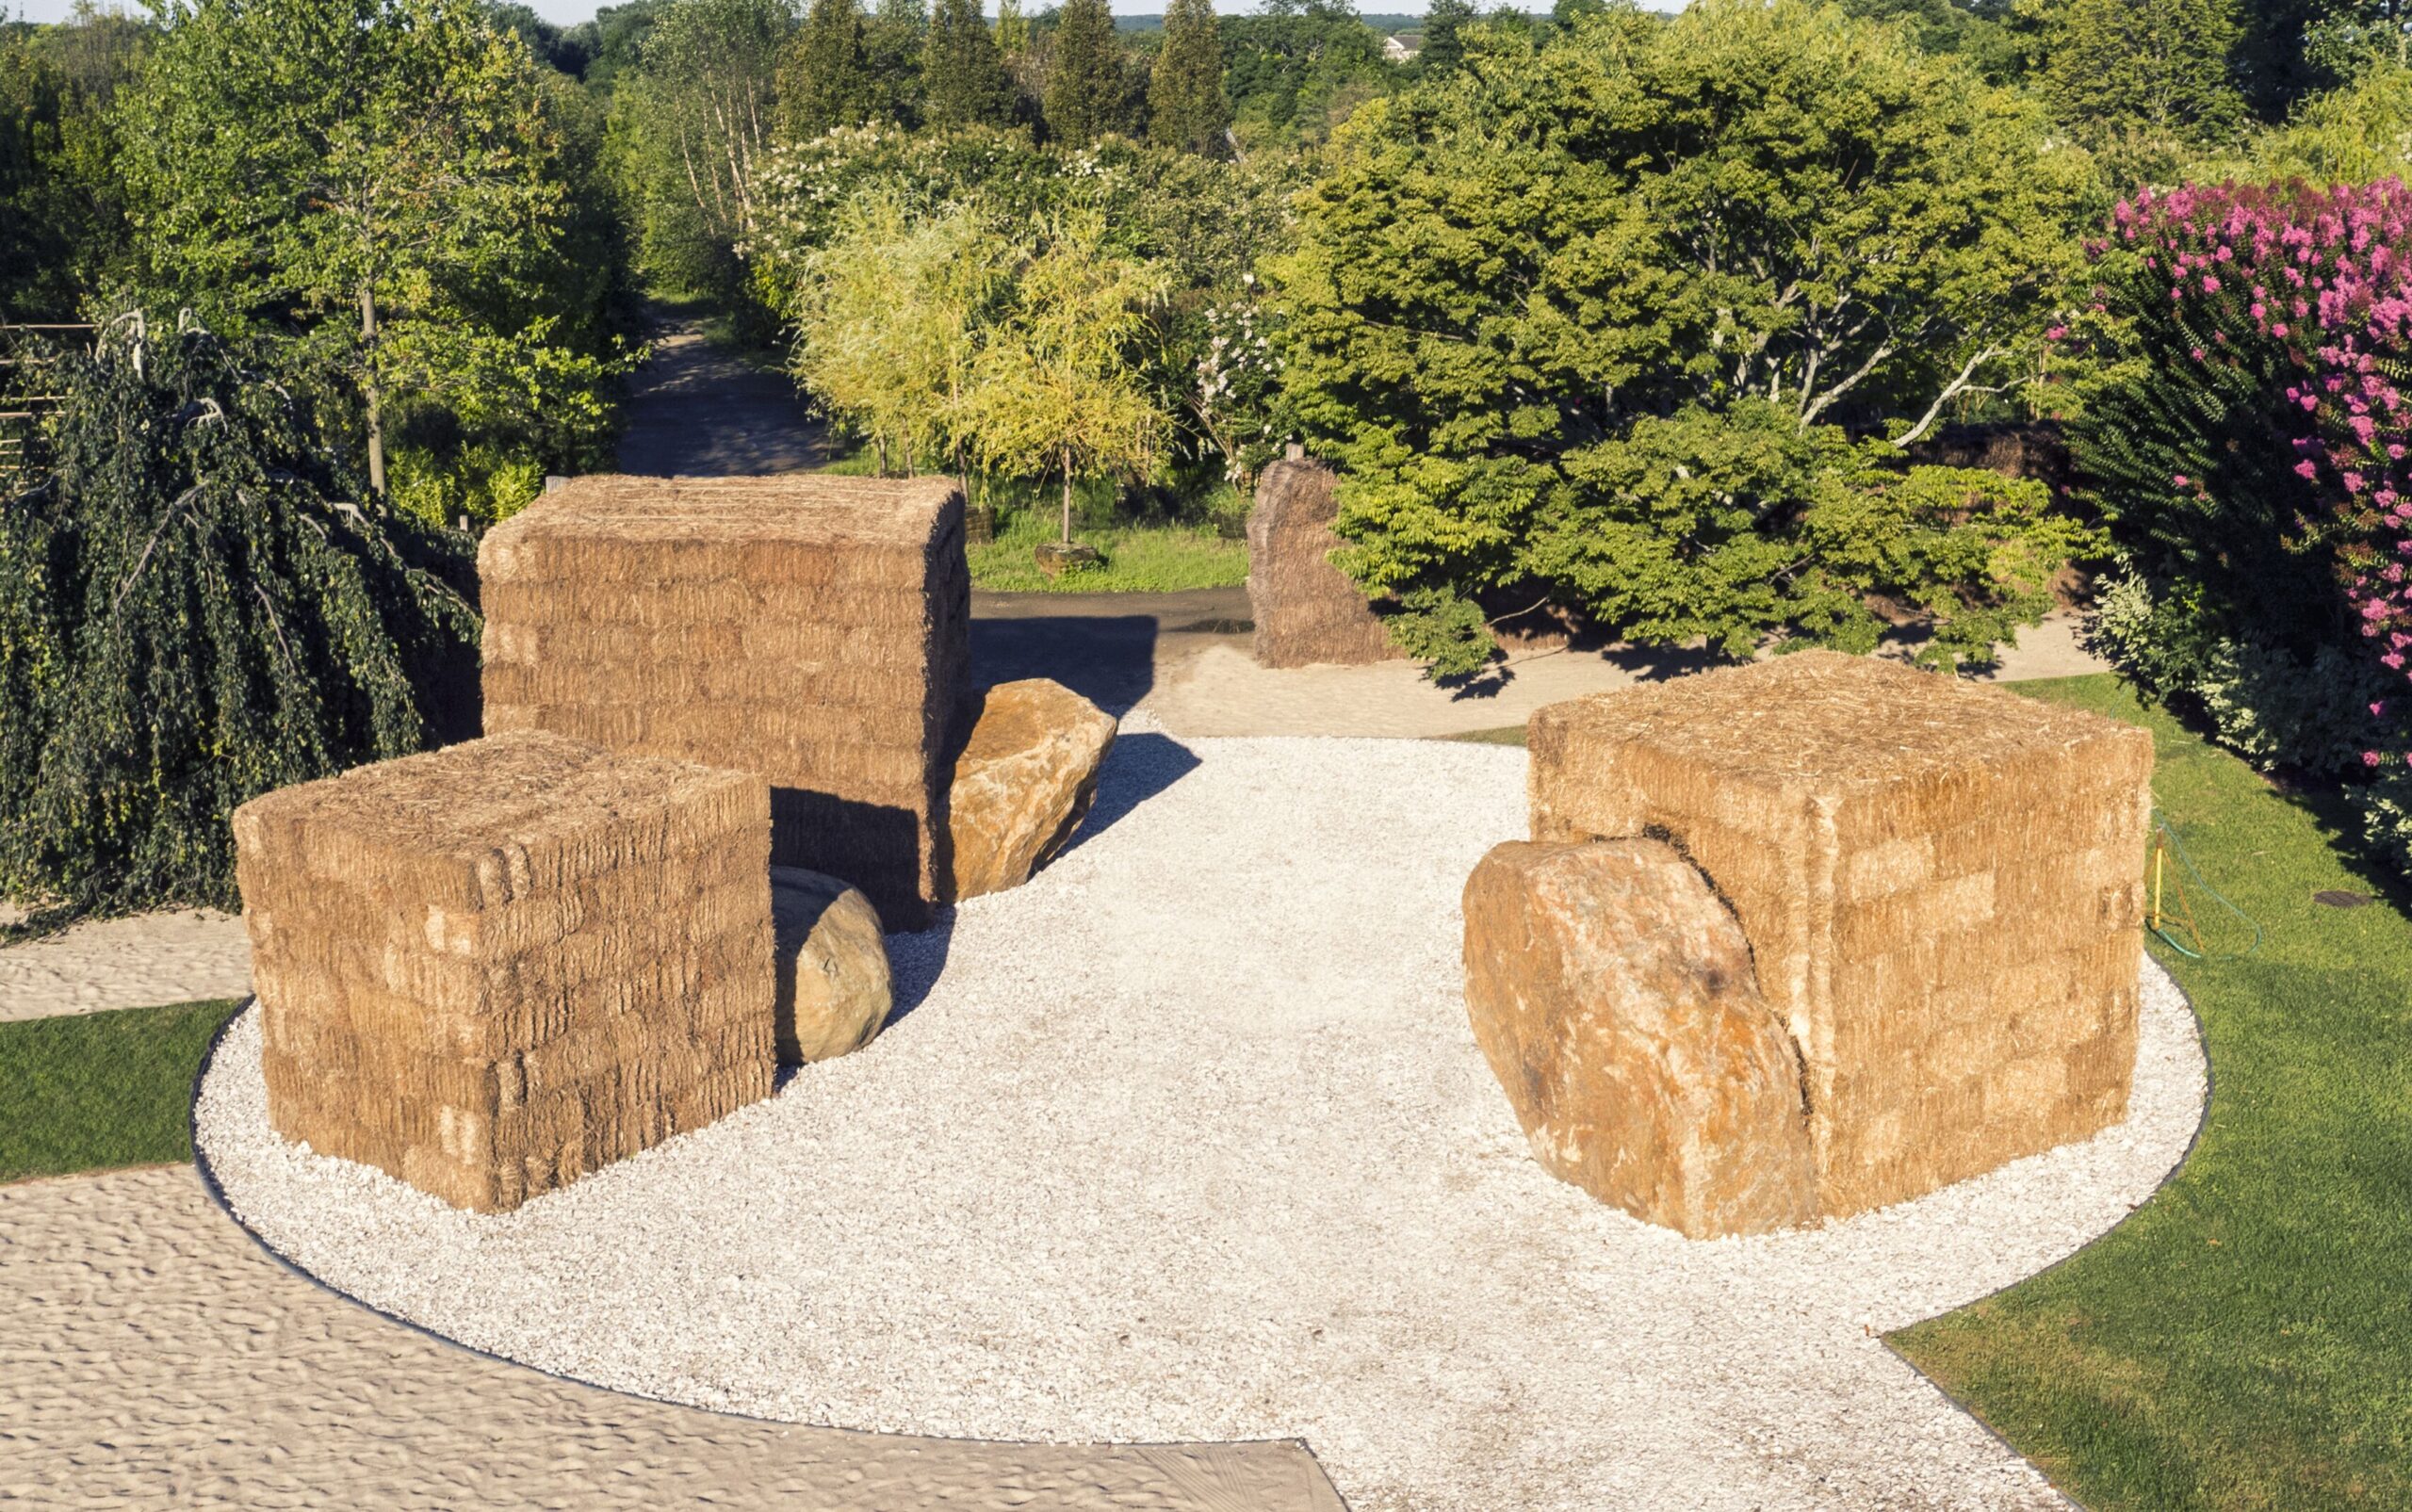 PERMANENT TRANSIENCE, 2016, a site-responsive installation, 3 cubic forms made of hay bales with metal armatures; 11 ft H x 52 ft diameter; Marders Nursery, Bridgehampton, NY; Parrish Road Show, Parrish Art Museum Olga Goworek photography Olga Goworek photography